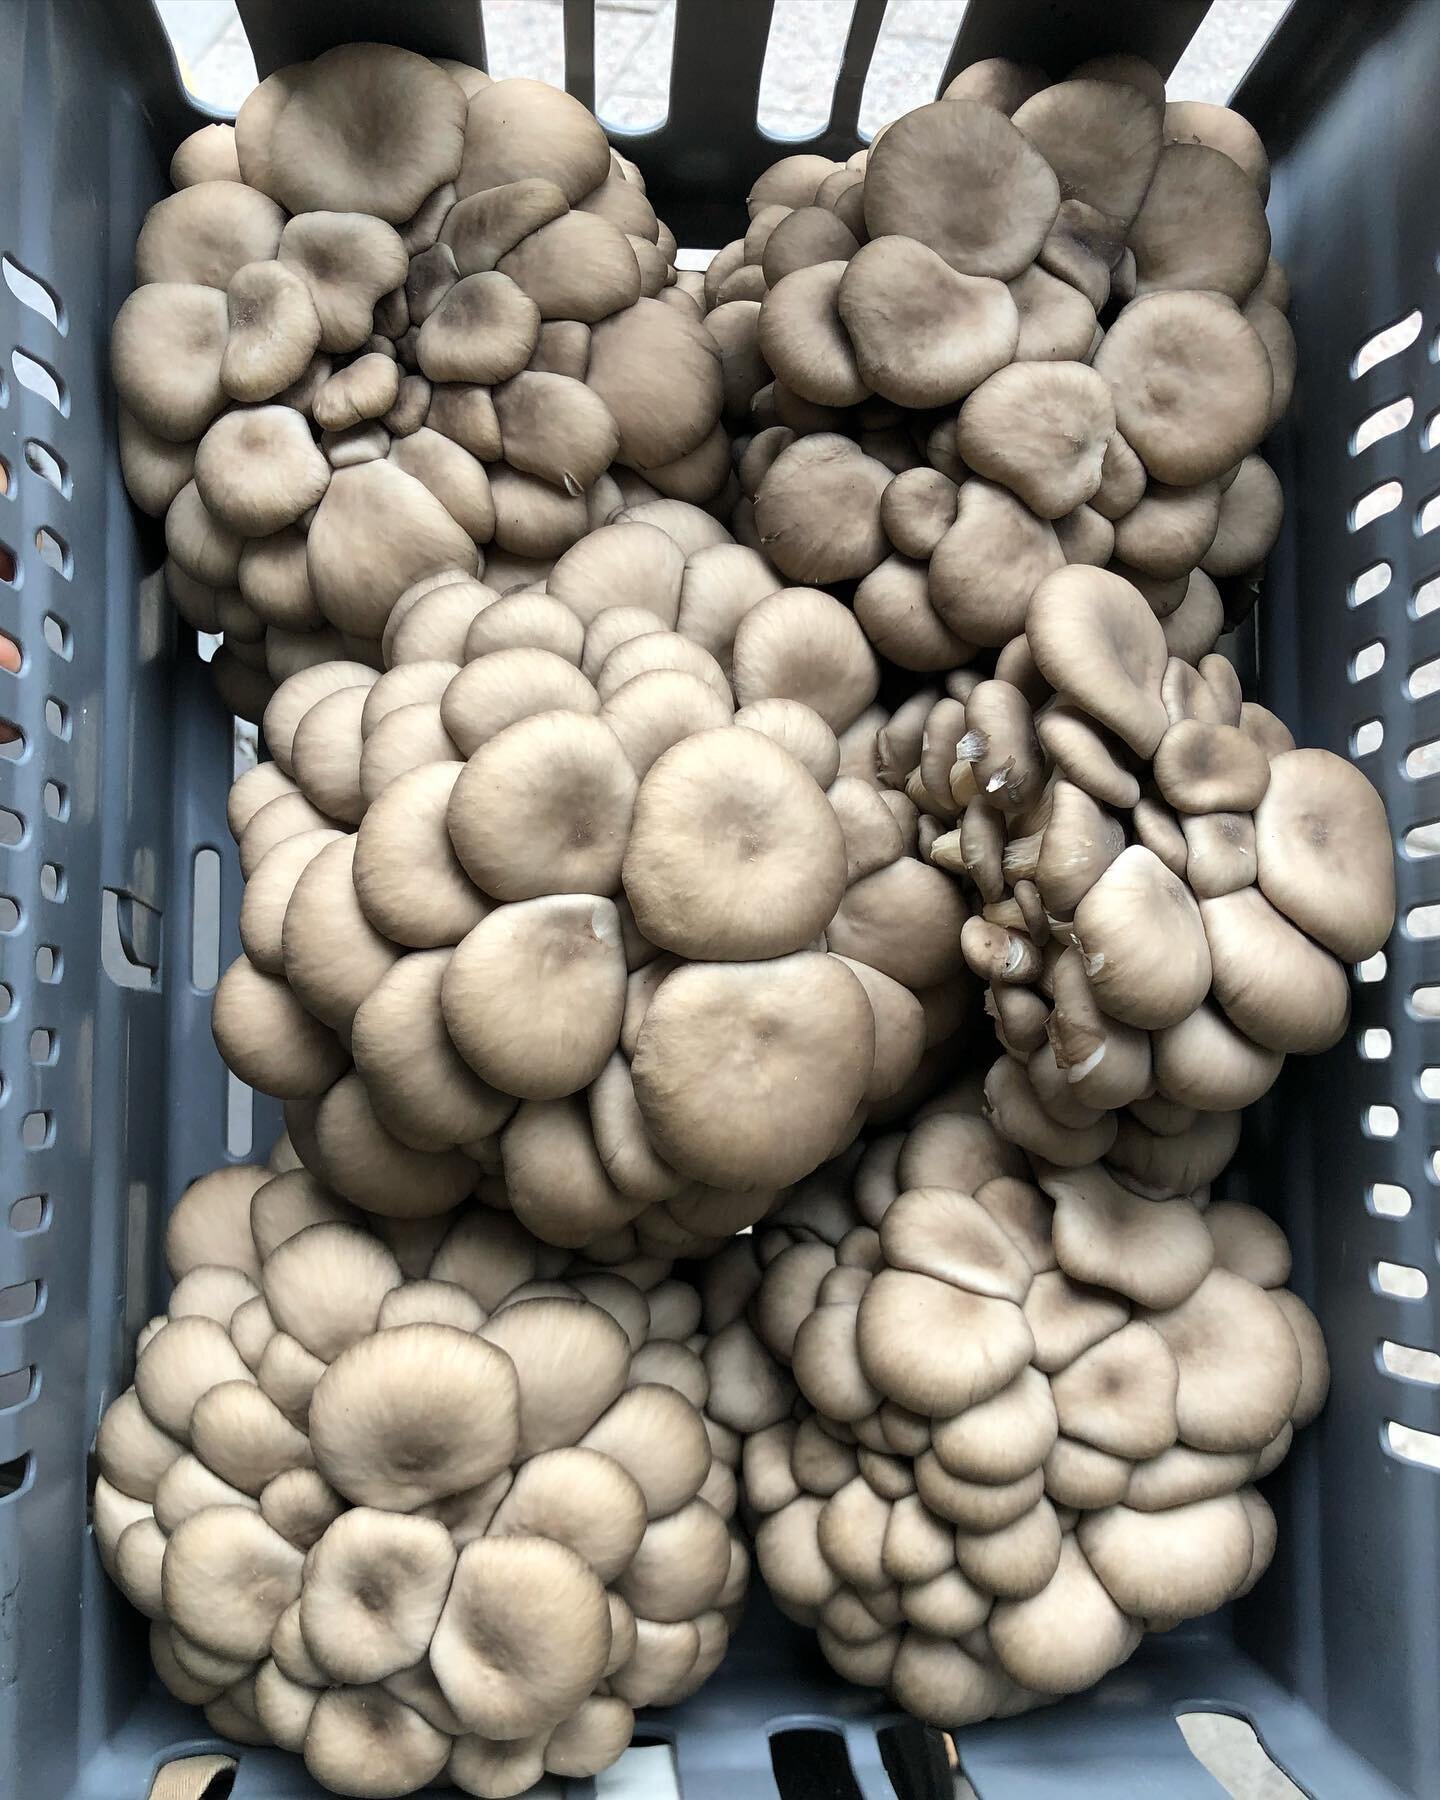 Organic oyster mushroom from @fungigardenab 
Available today at our boutique in Kungsholmsgatan 20. Open kl 11-19. 
Welcome to our gentle food revolution.